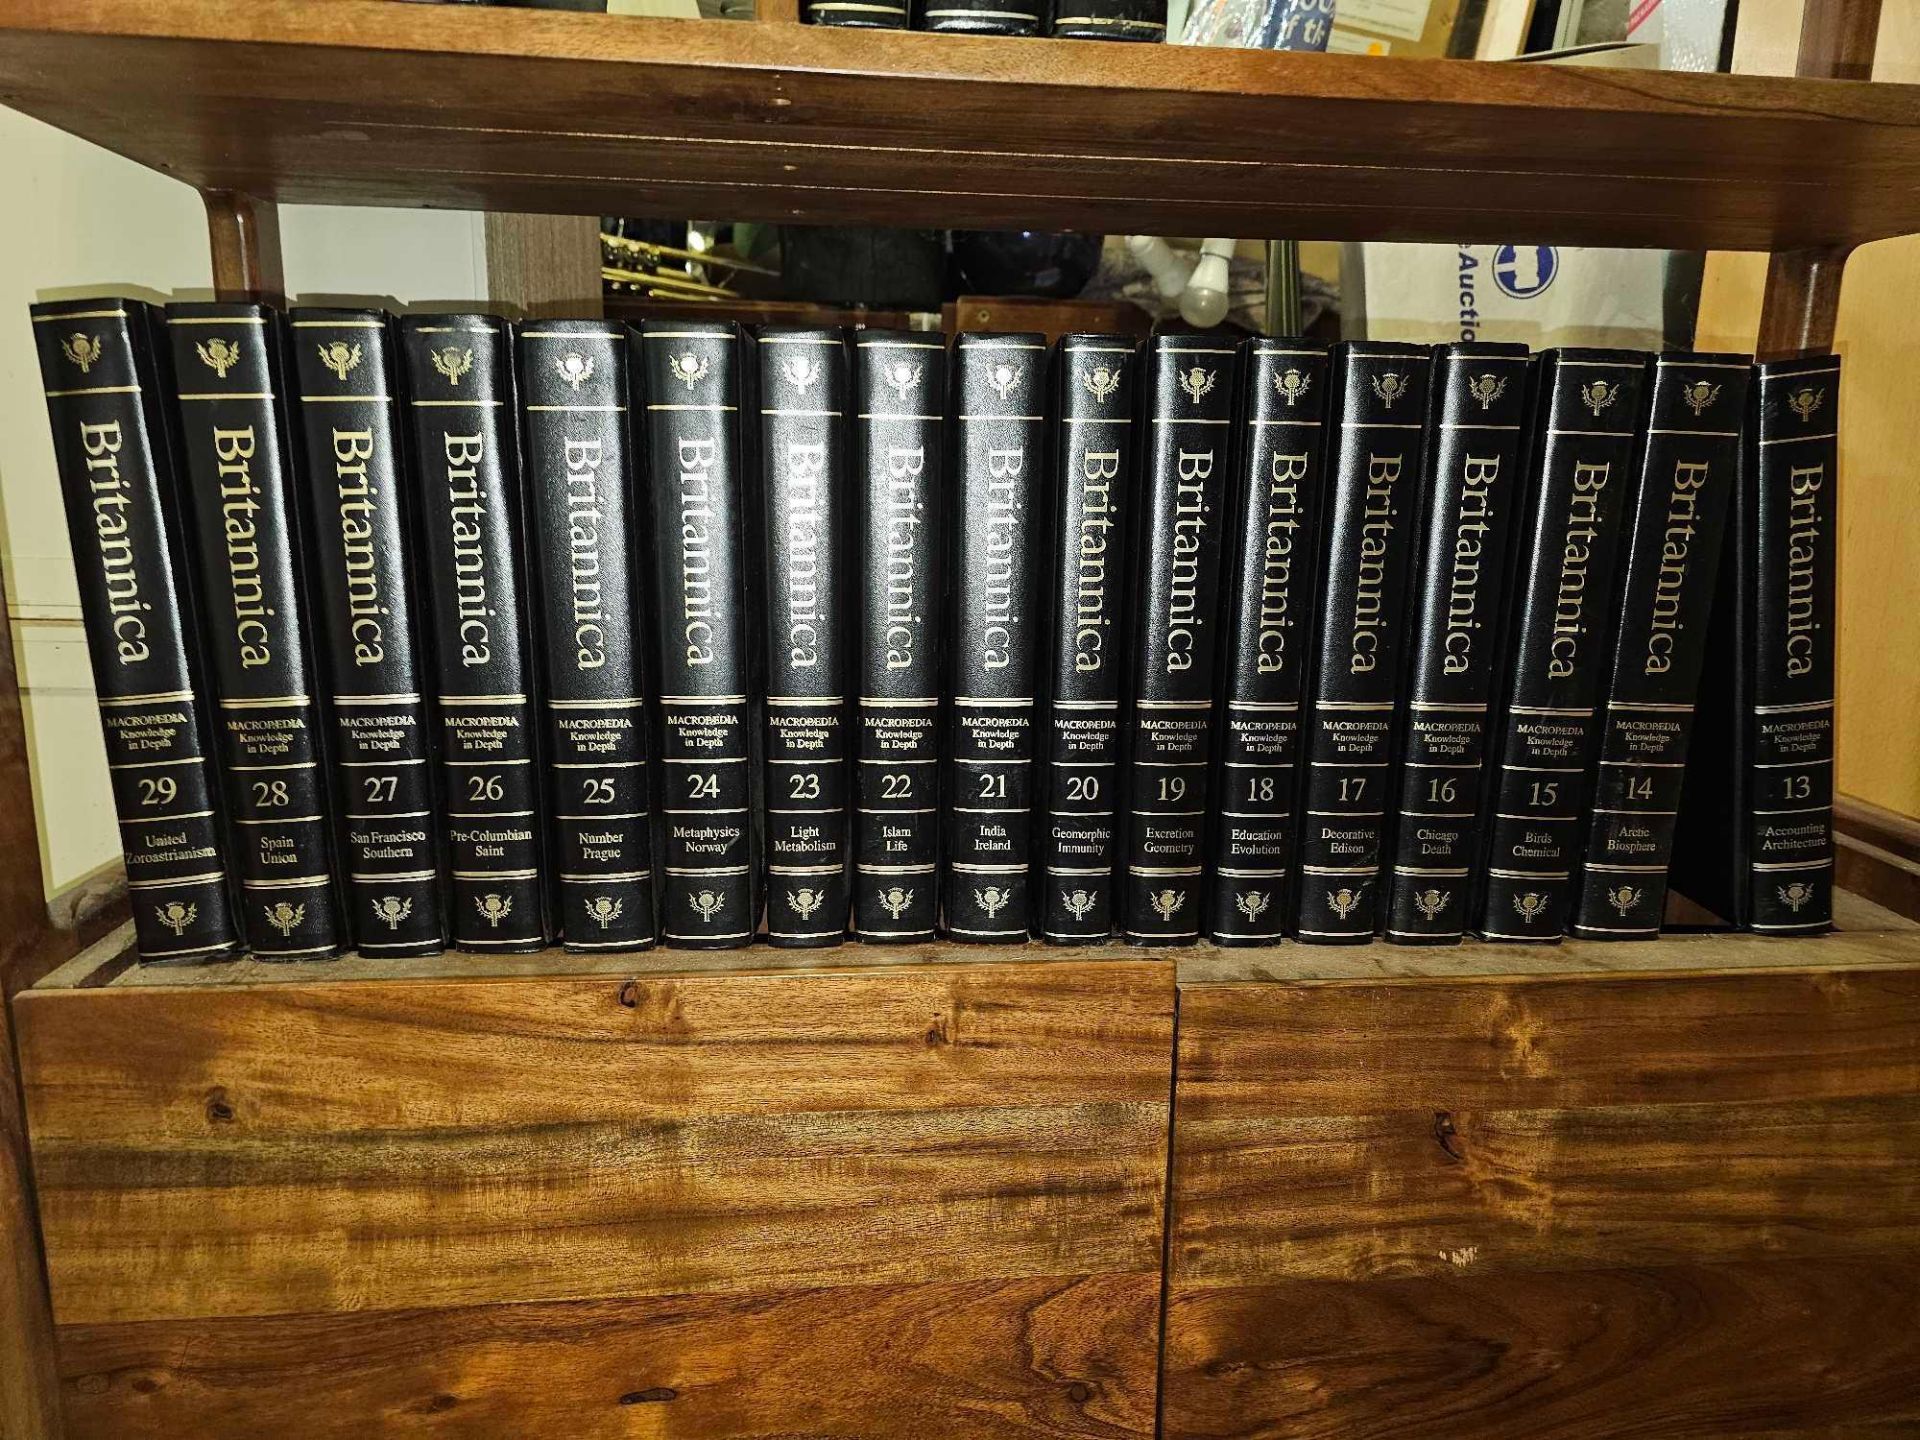 Encyclopaedia Britannica Volumes 13 To 29 Few Marks And Scuffs Throughout 28cm Tall 21cm Wide